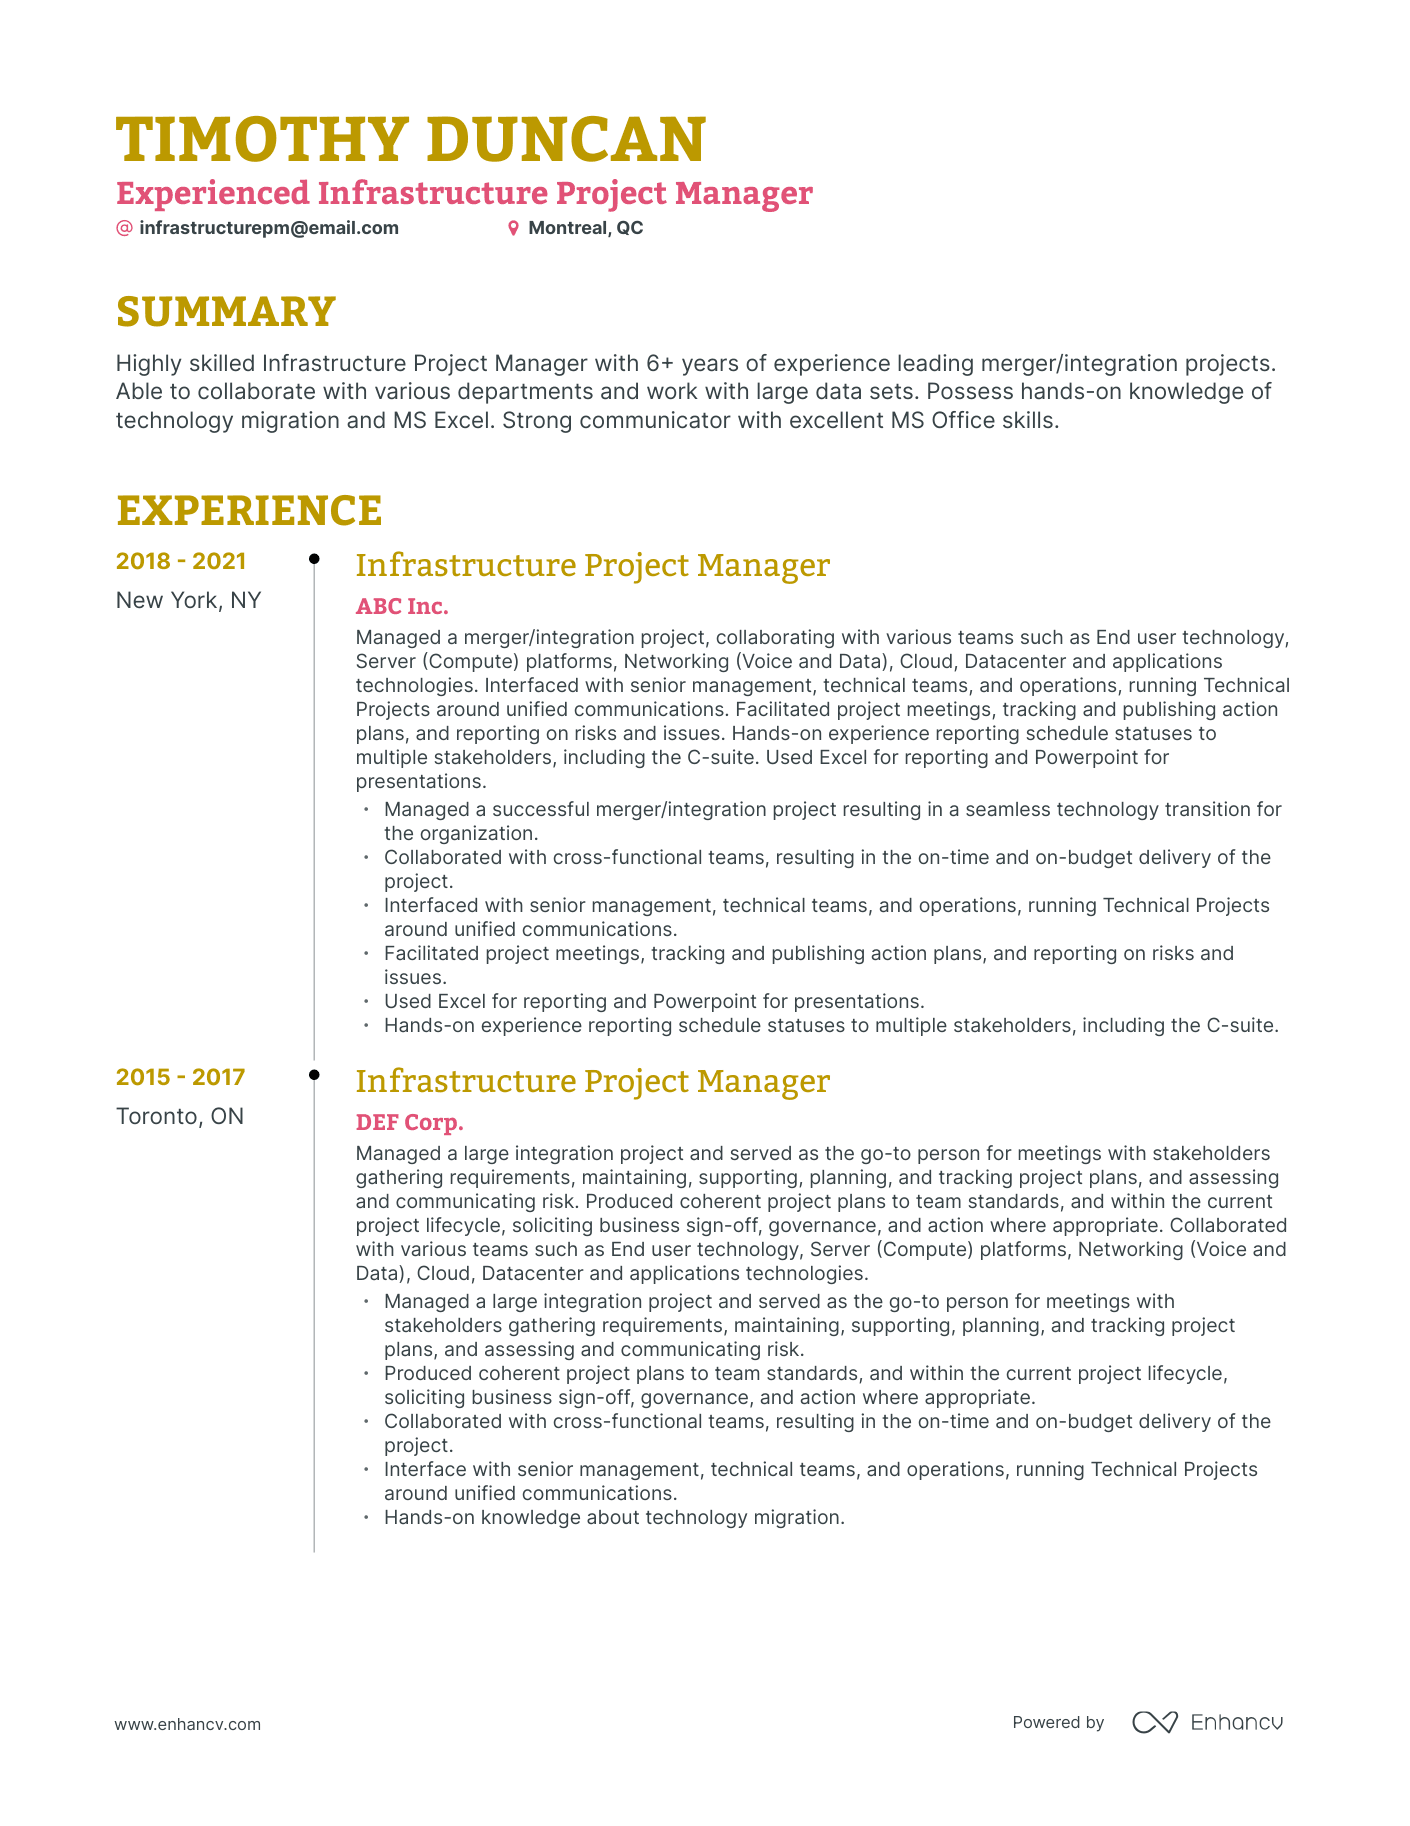 Timeline Infrastructure Project Manager Resume Template